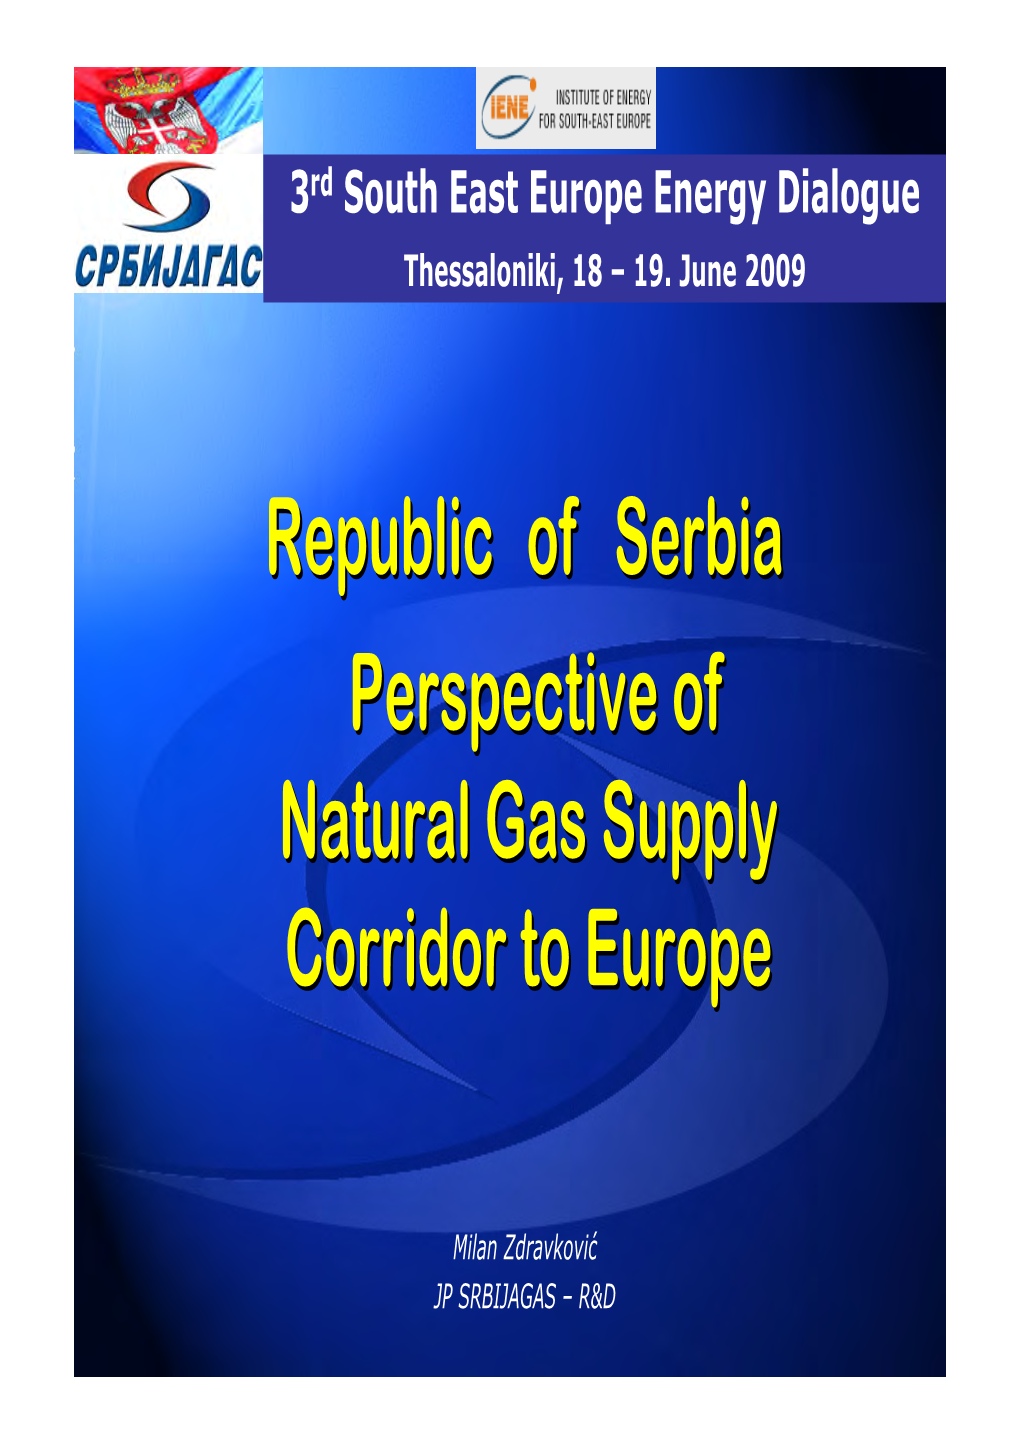 Perspective of Natural Gas Supply Corridor to Europe Republic of Serbia